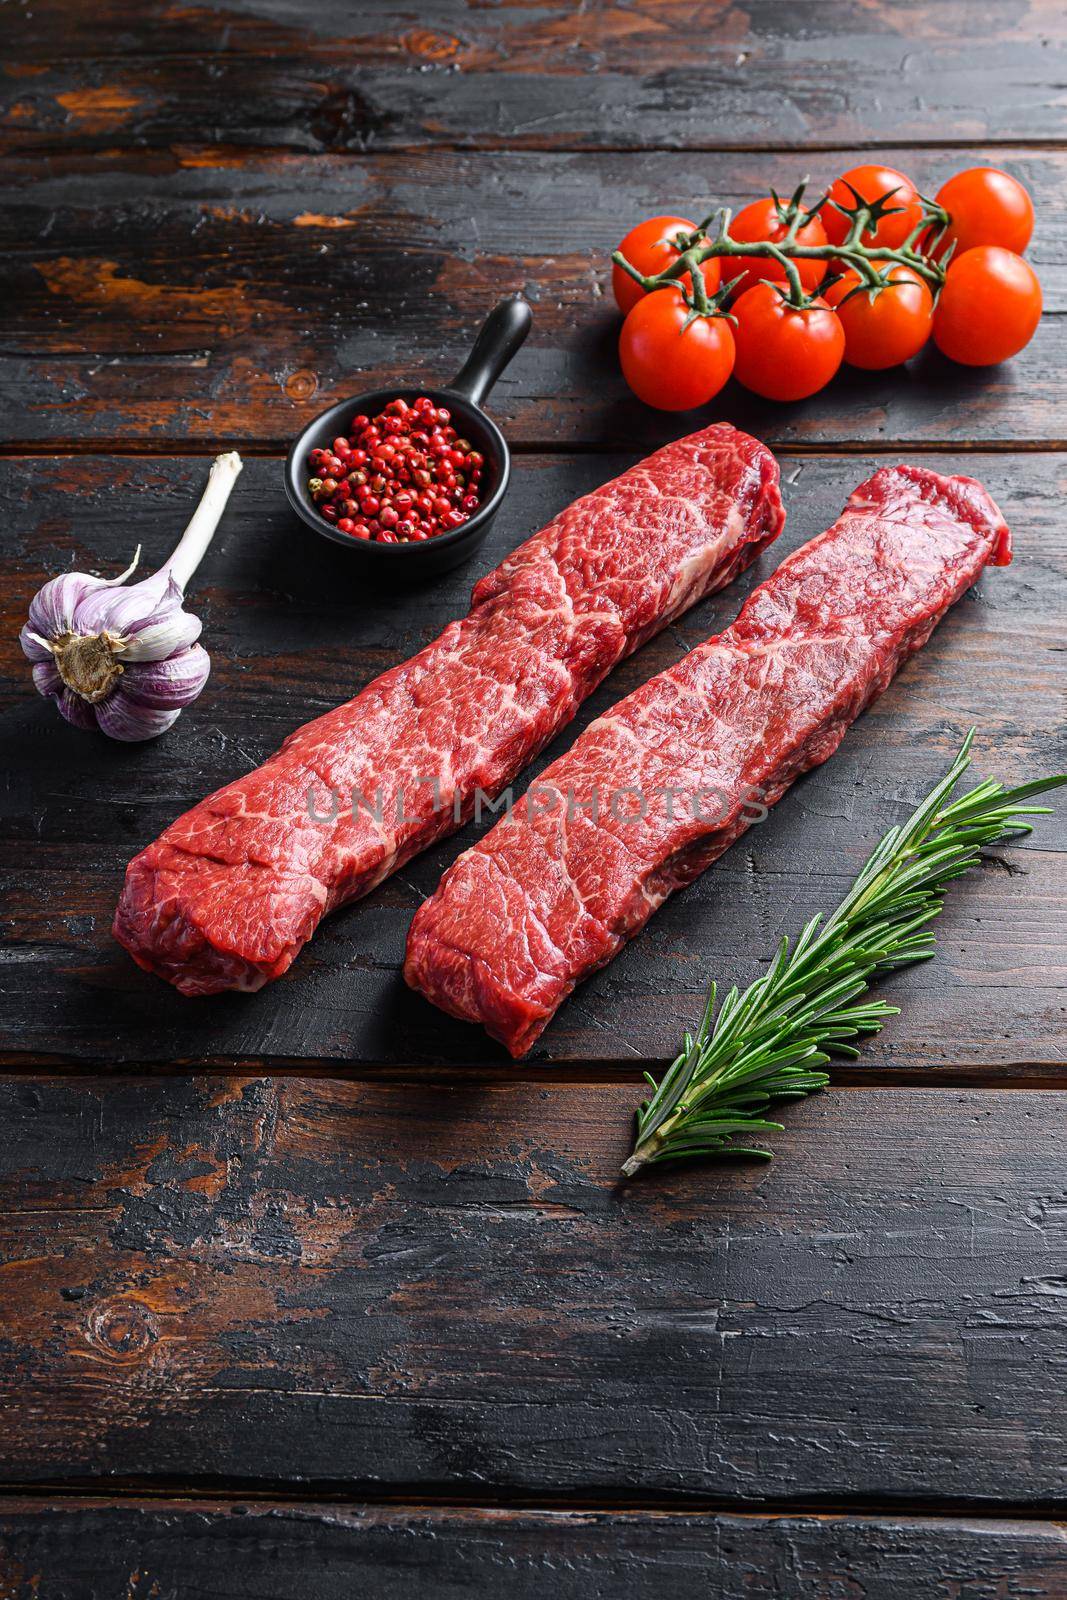 Denver steak two fresh, raw steaks from the cut of beef or organic top blade with herbs on old dark wooden table surface side view space for text vertical by Ilianesolenyi